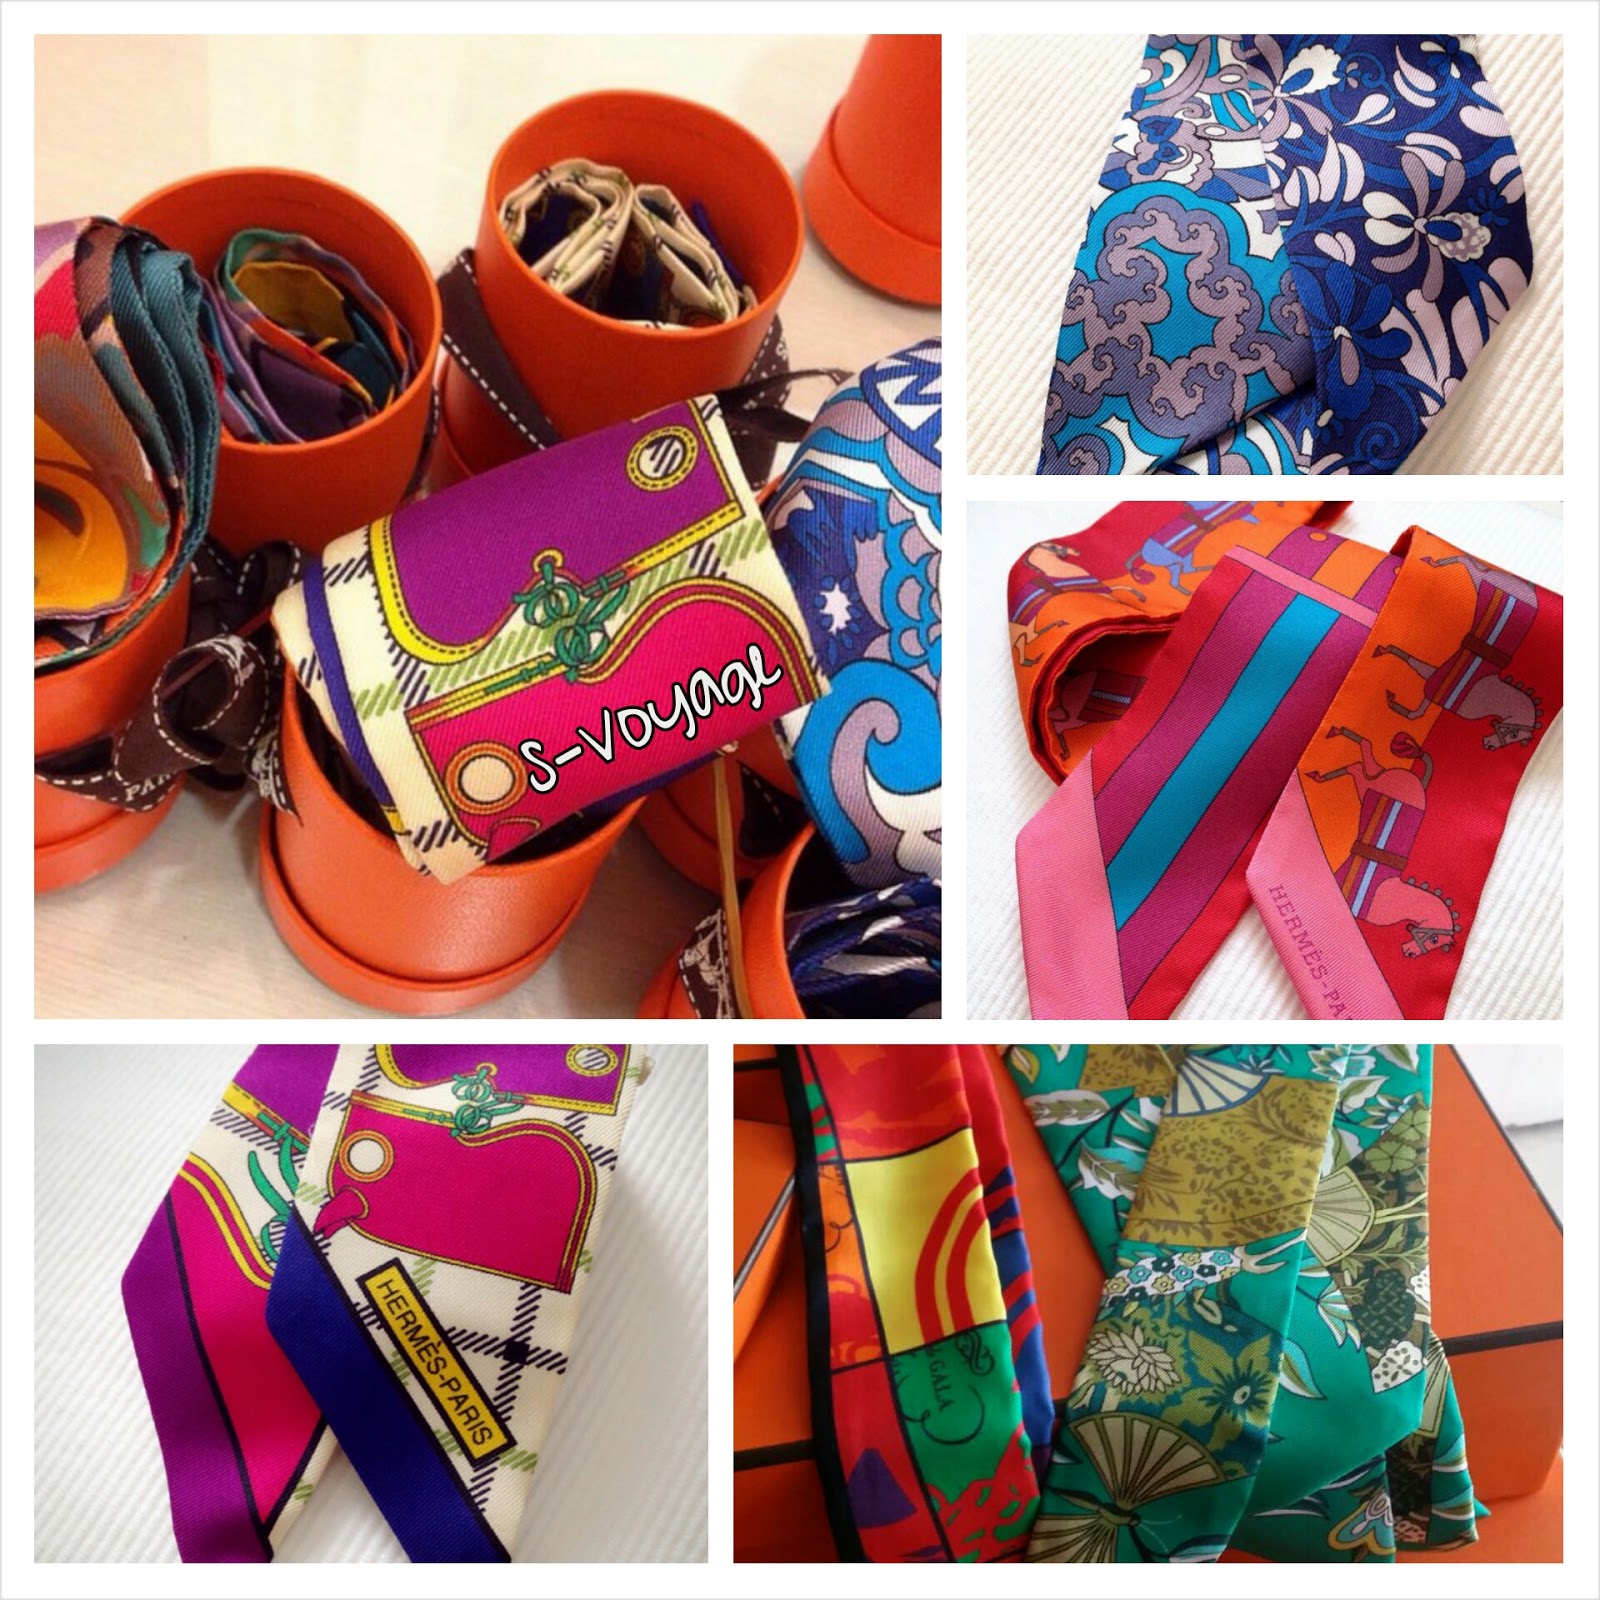 Always Authentic @ S-Voyage: New Hermes Twilly Scarf available for sale.